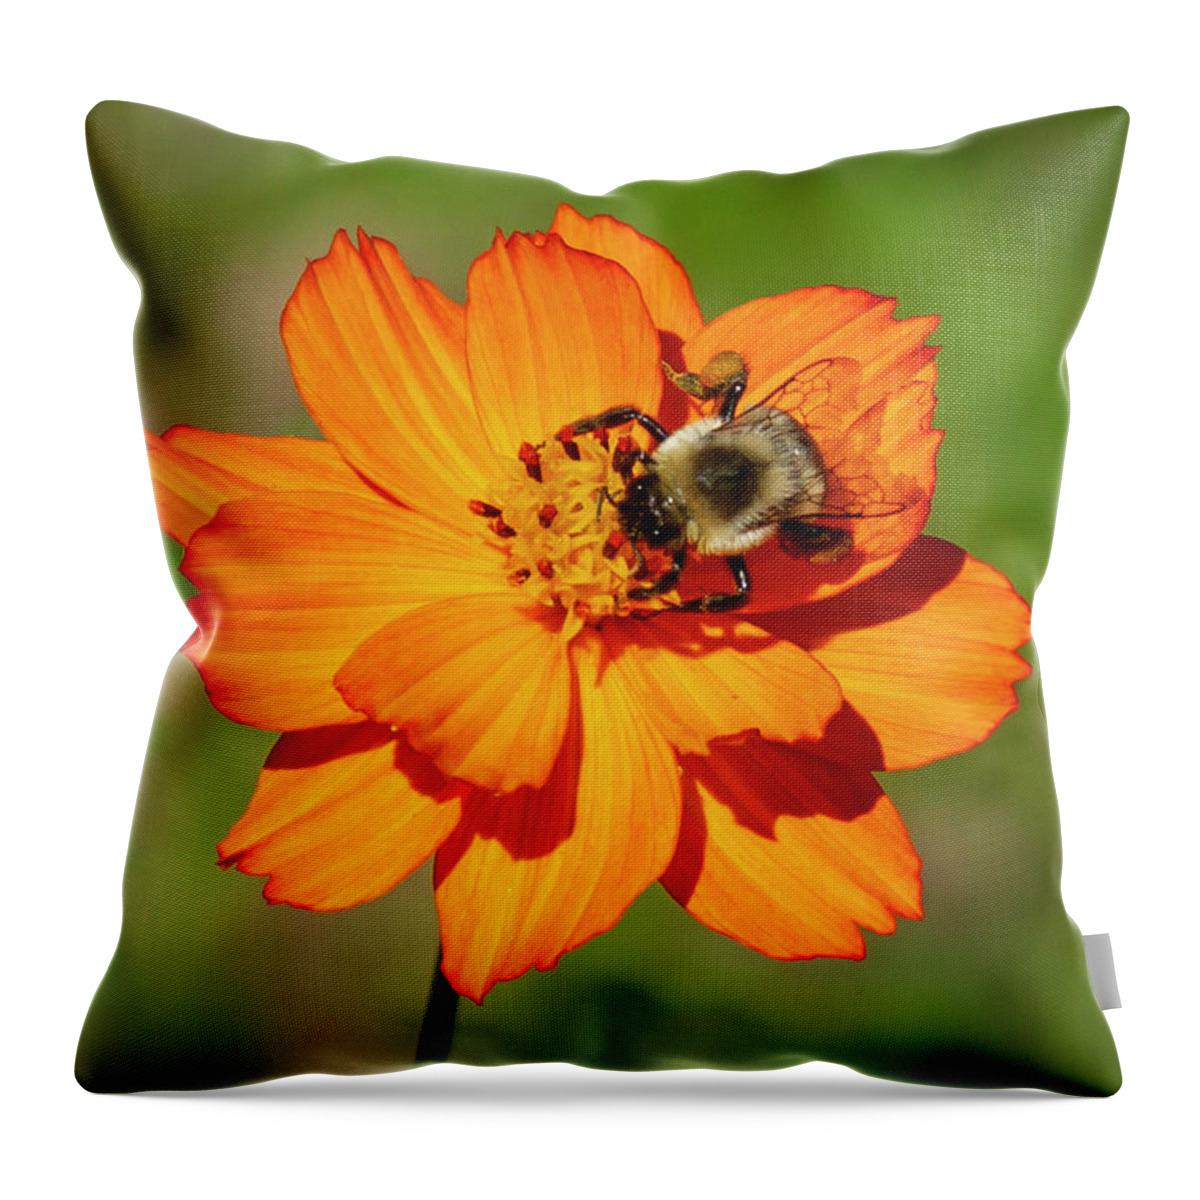 Reid Callaway Flowers And Friends Throw Pillow featuring the photograph Bumble Bee Concentration Flower Garden Wildlife Art by Reid Callaway